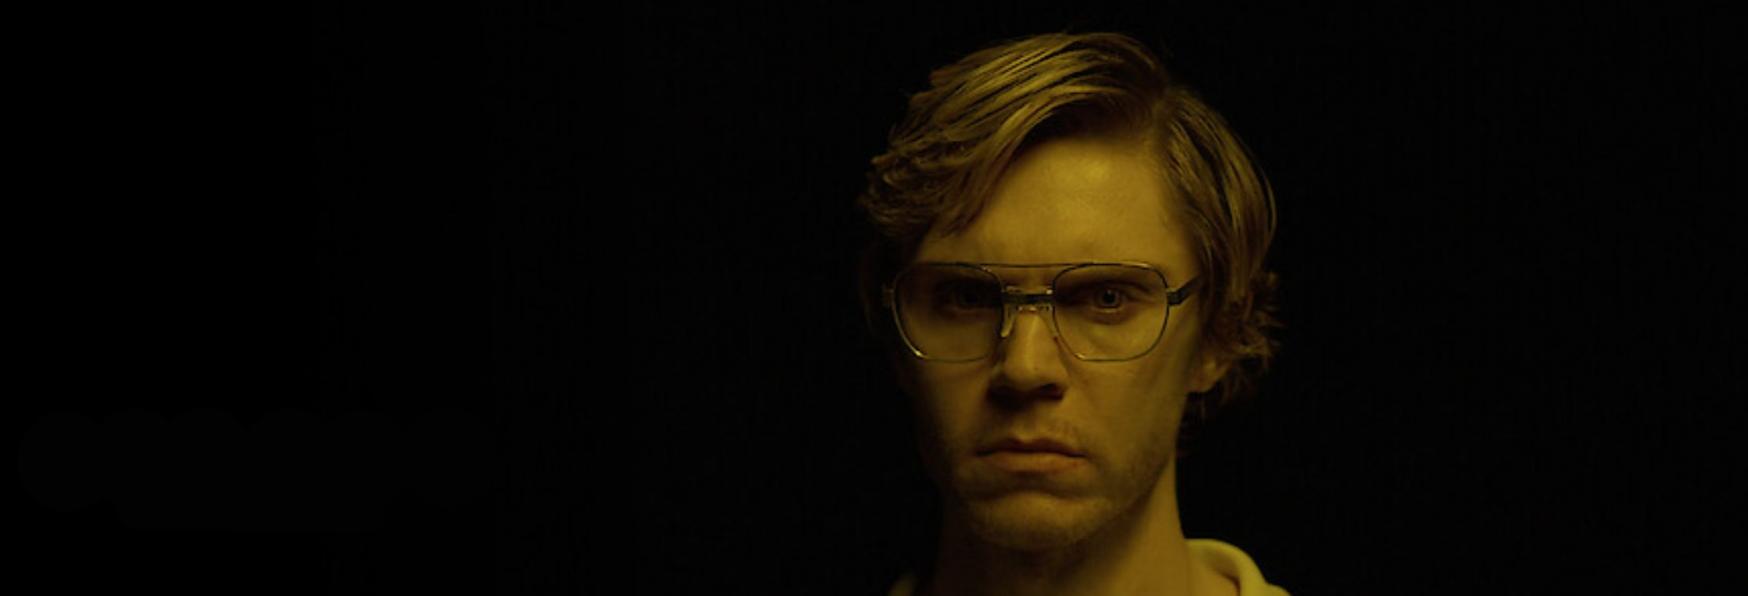 Dahmer - Monster: Kim Alsup reveals, "It was one of the Worst Shows I've ever worked on"